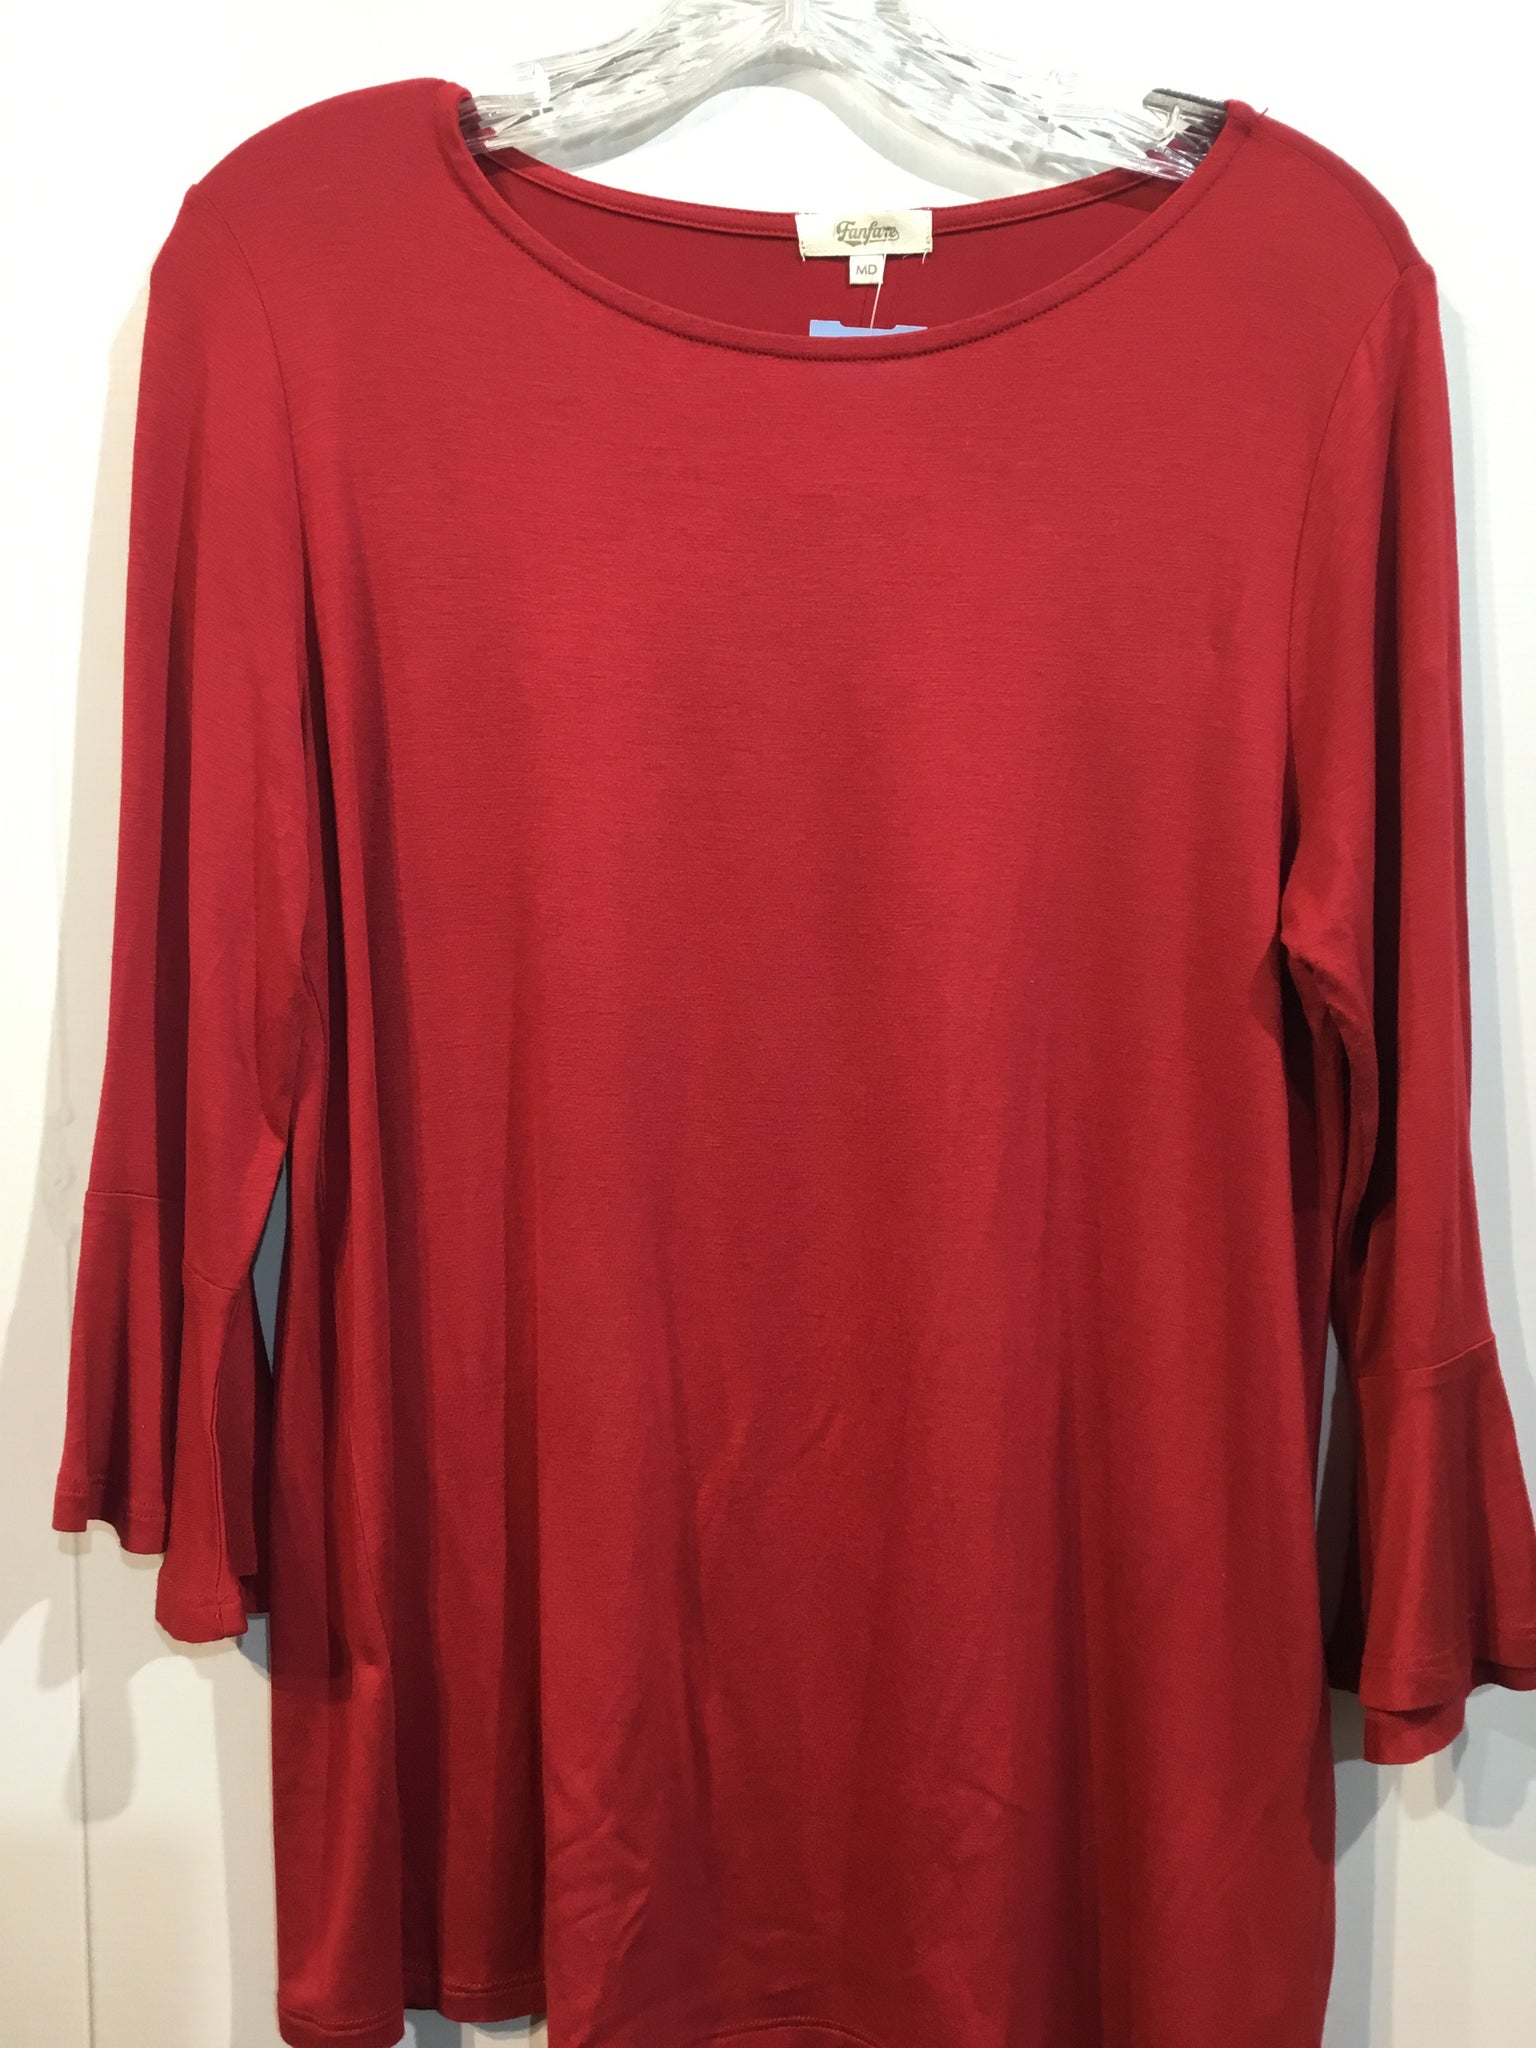 Fanfare Size M/8-10 Red Tops